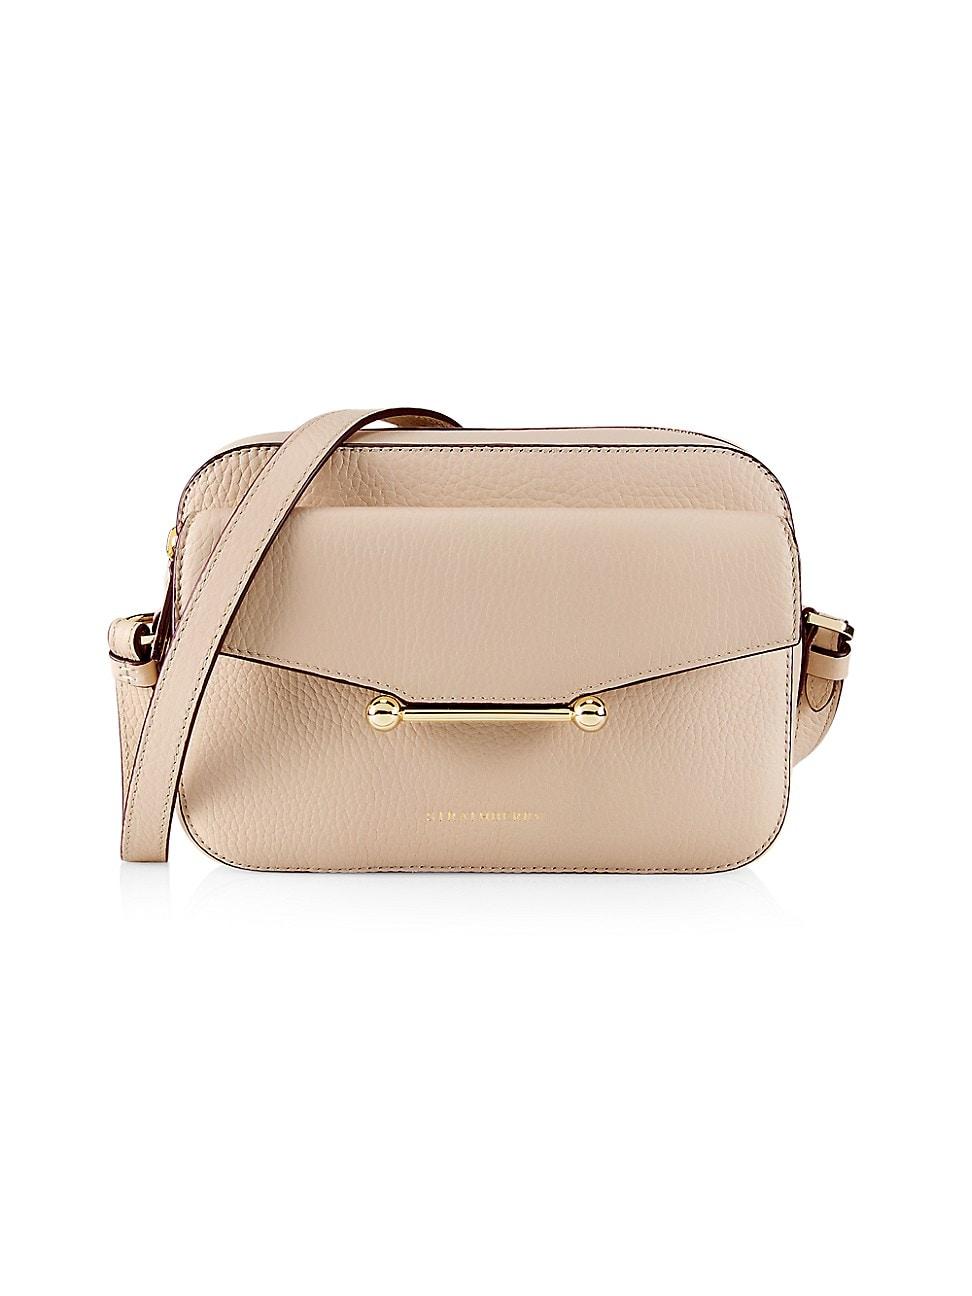 Strathberry Mosaic Grain Leather Camera Bag in Natural | Lyst